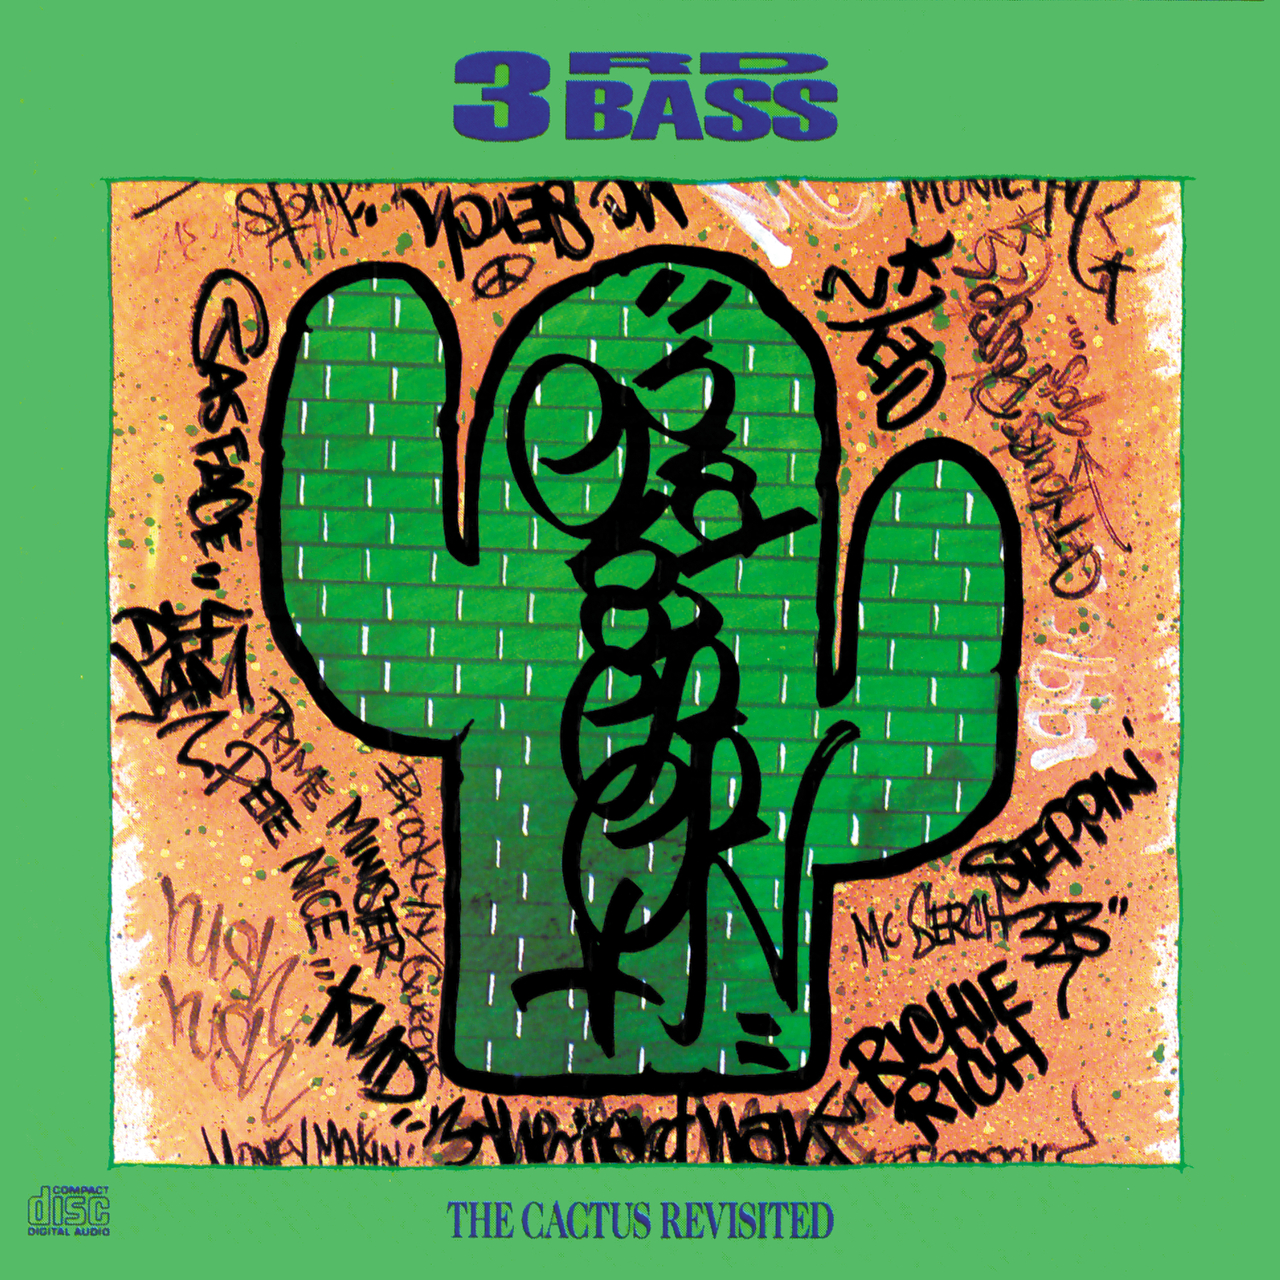 3rd_bass_the_cactus_revisited